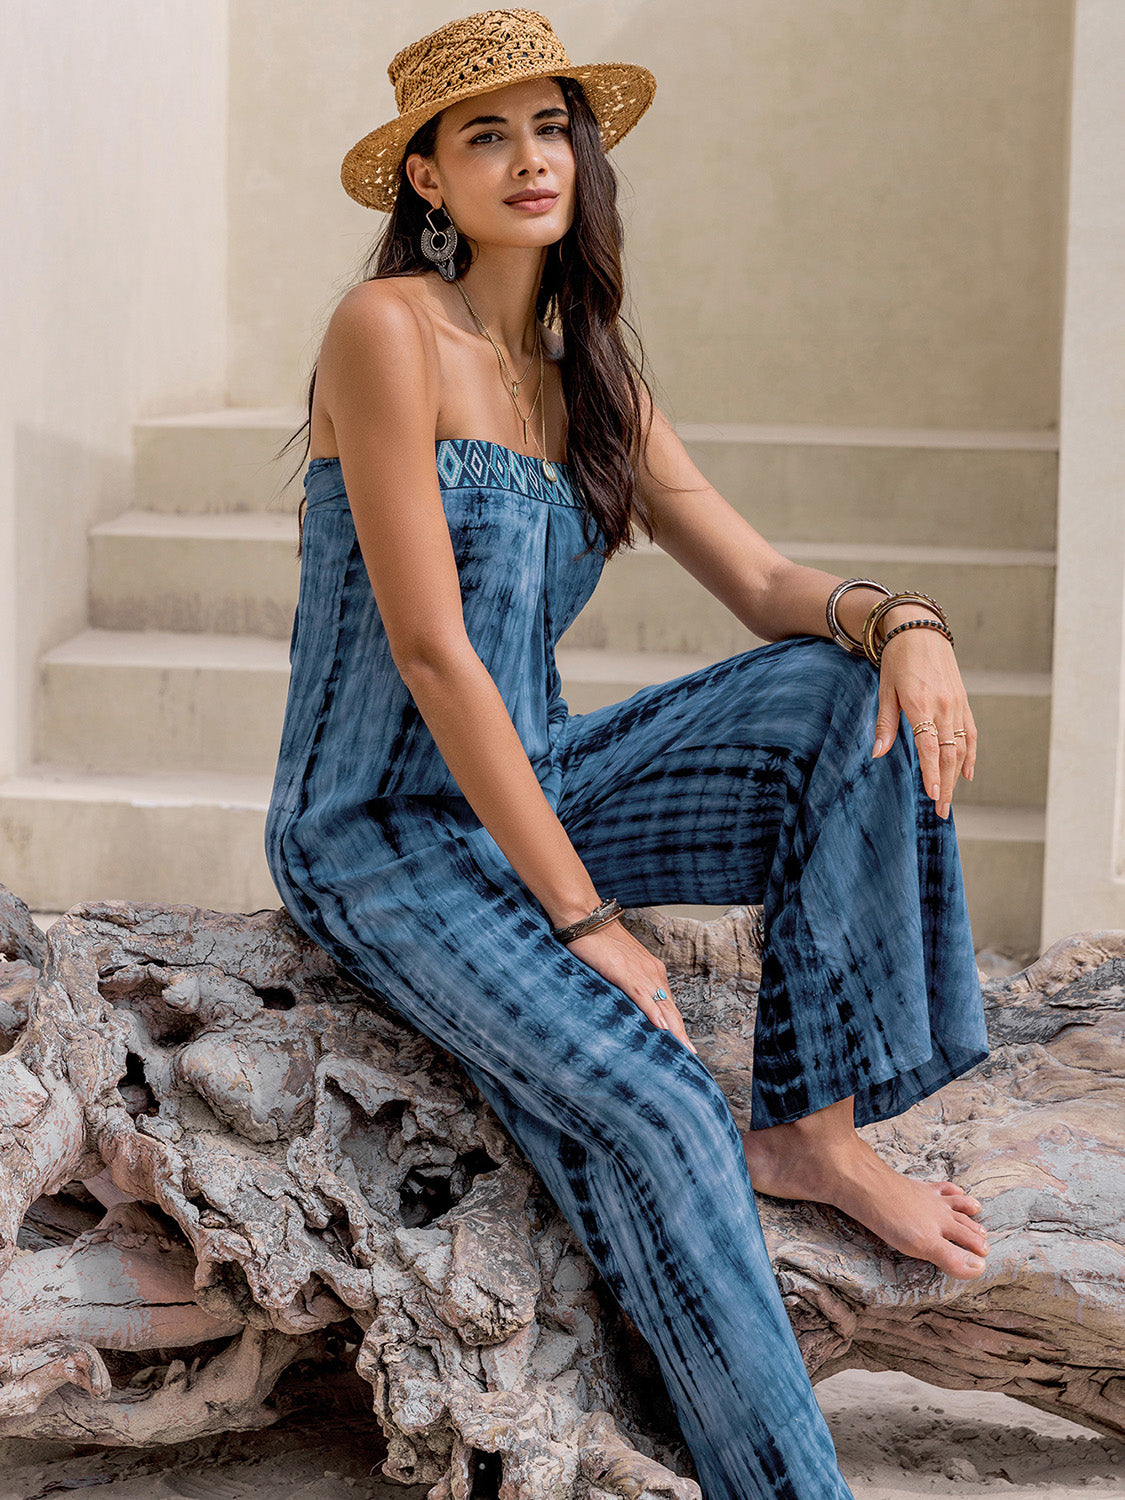 Tied Tube Wide Leg Jumpsuit Sunset and Swim   